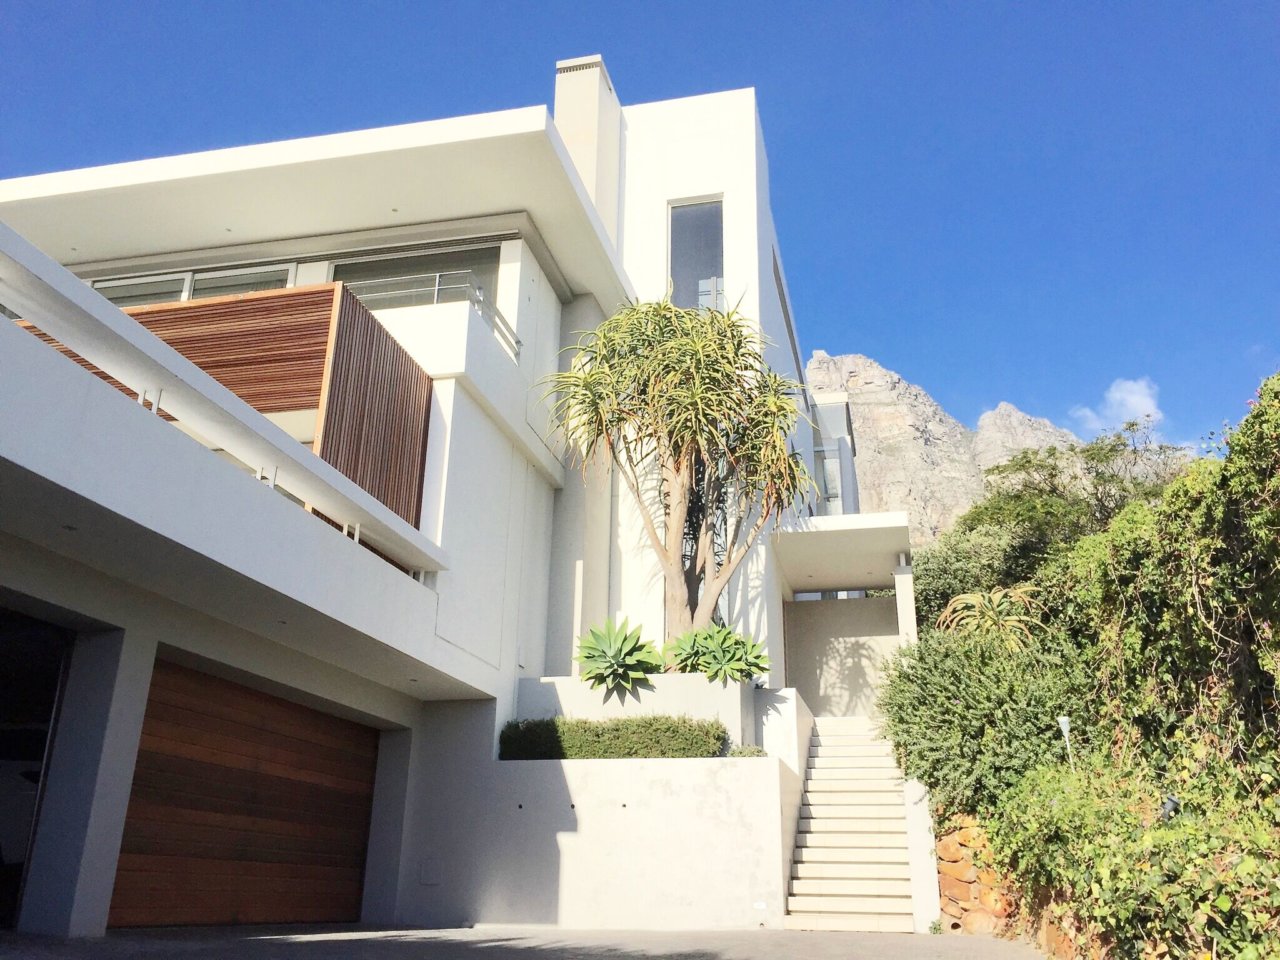 Photo 25 of Aqua Villa accommodation in Camps Bay, Cape Town with 5 bedrooms and 5 bathrooms